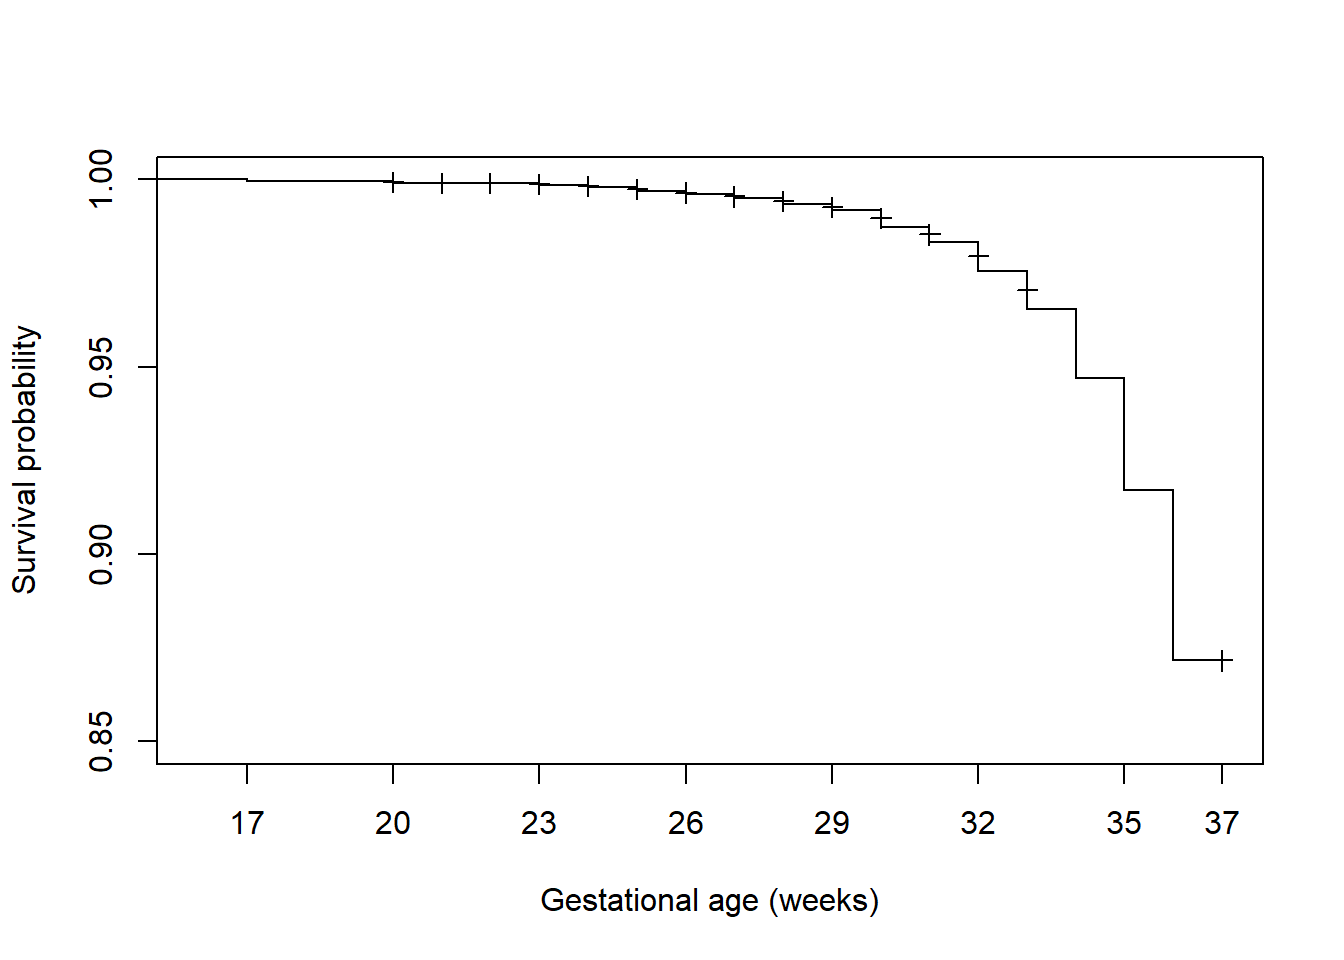 Survival function plot without confidence intervals